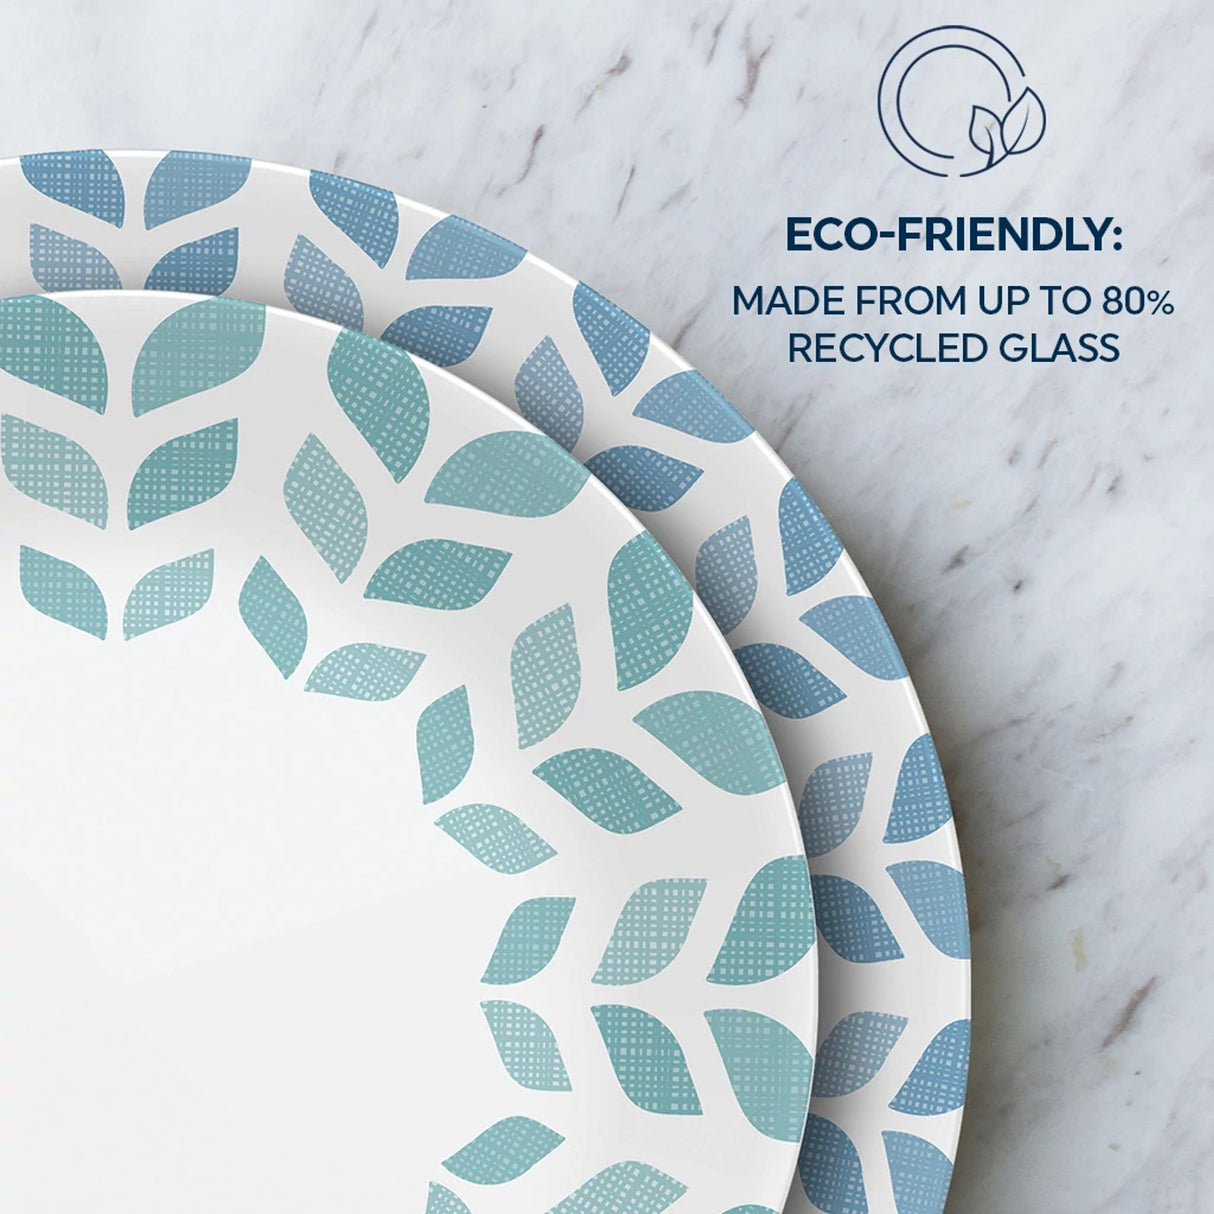  Northern Pines dinner &amp; salad plate with text that says eco-friendly made from up to 80% recycled glass